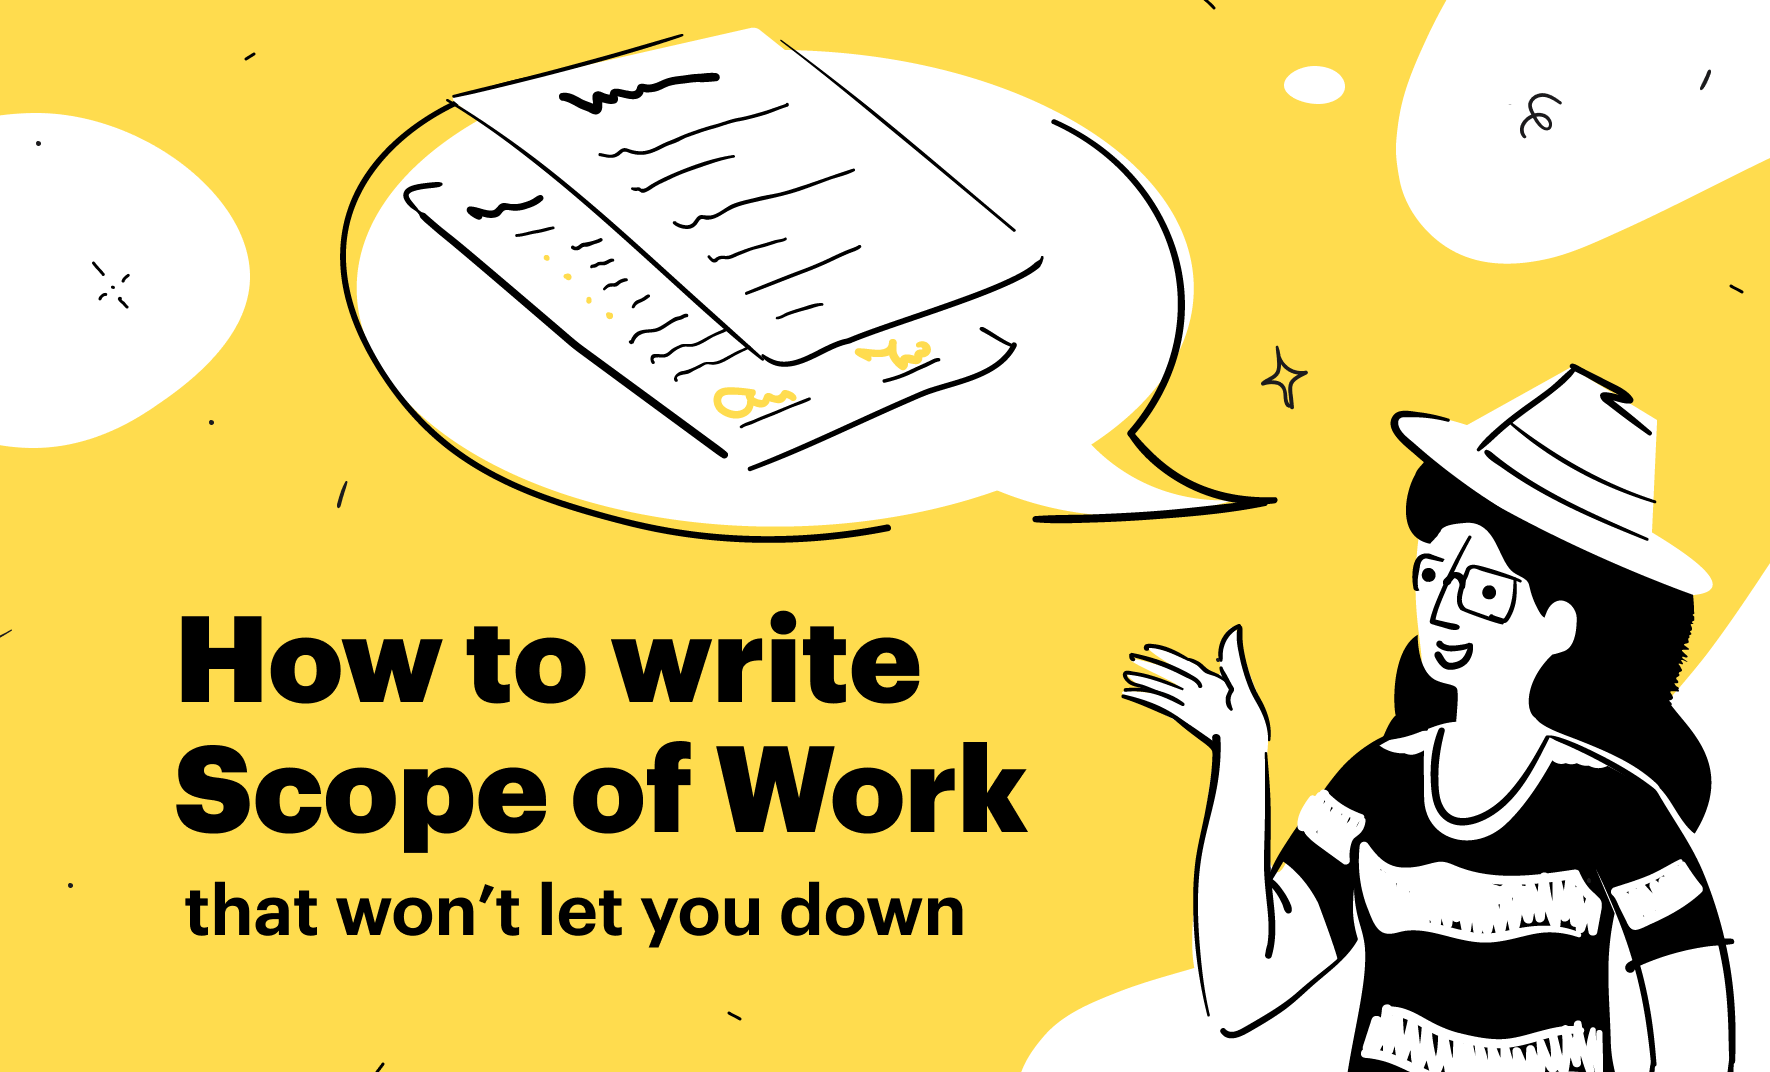 How to write Scope of Work that won't let you down